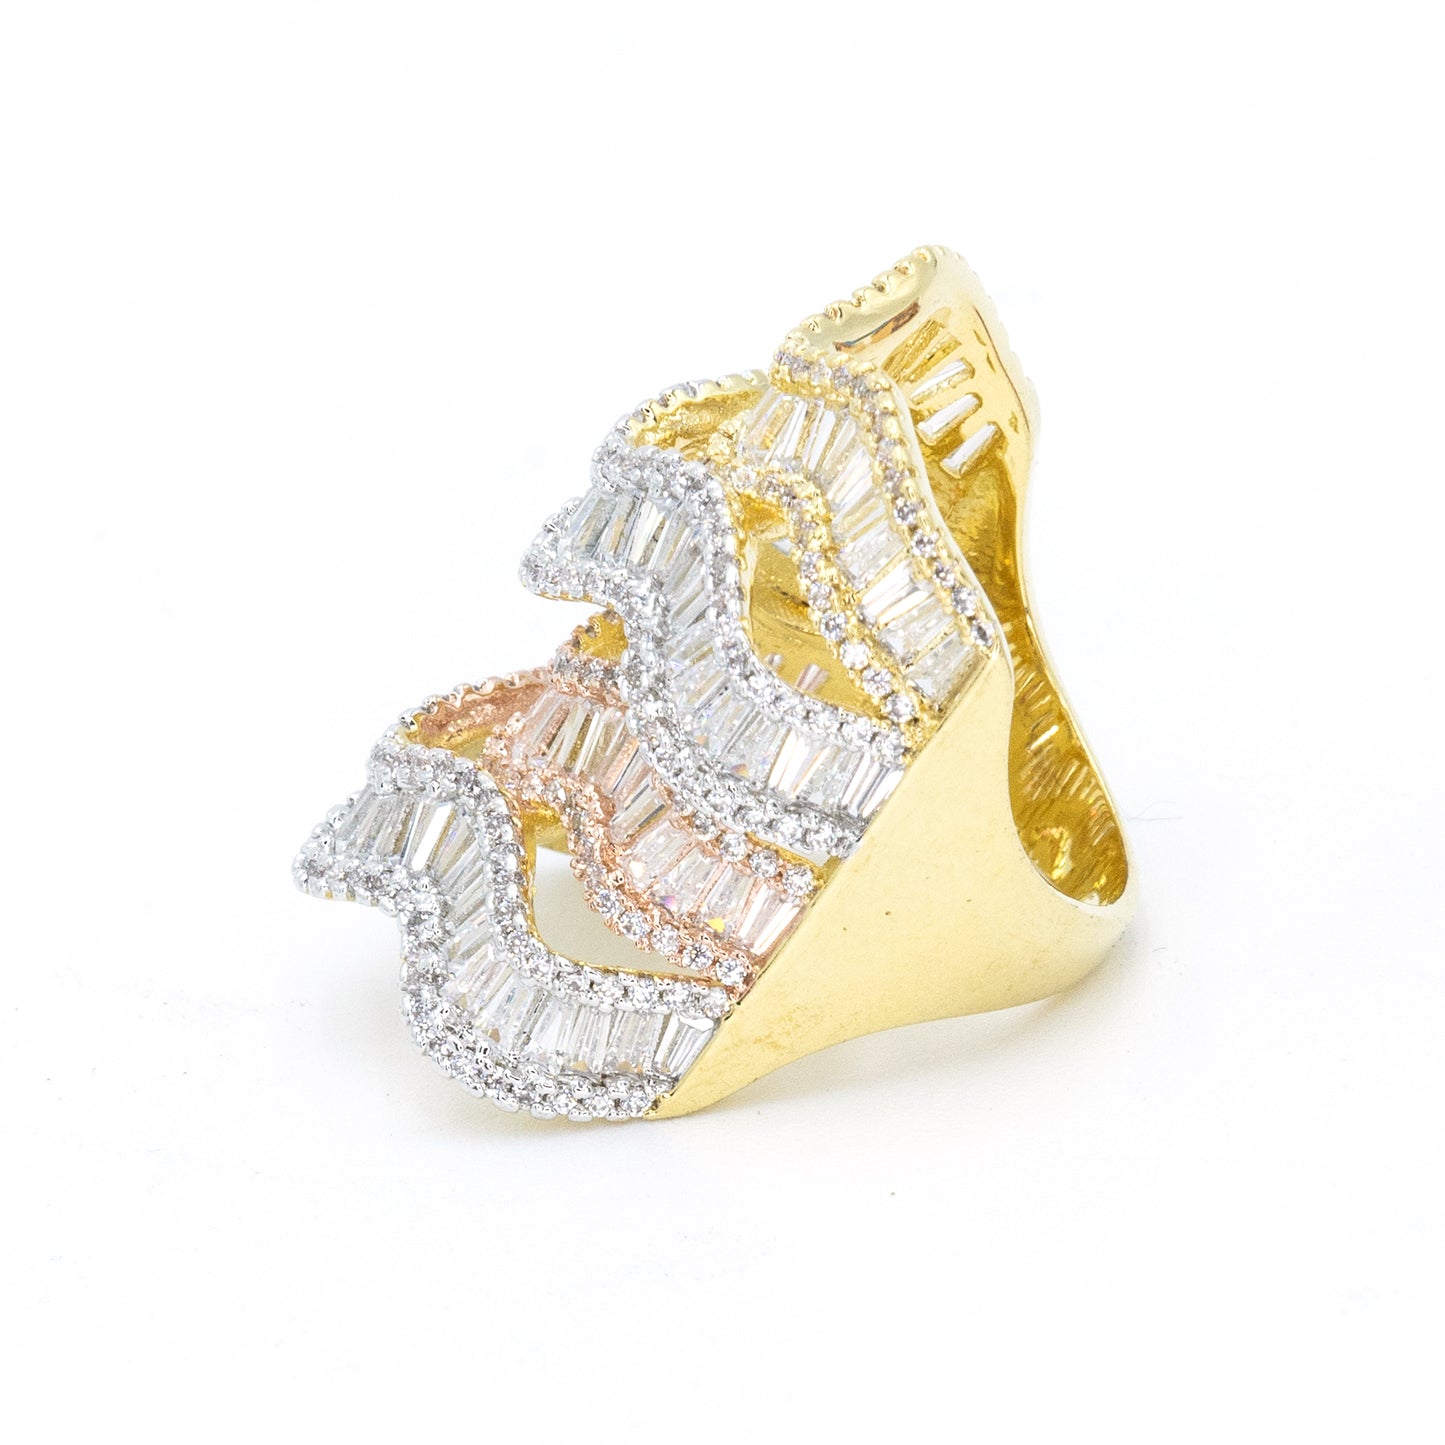 Tri colored baguette cocktail ring w/ 3A CZ stones rhodium G plated